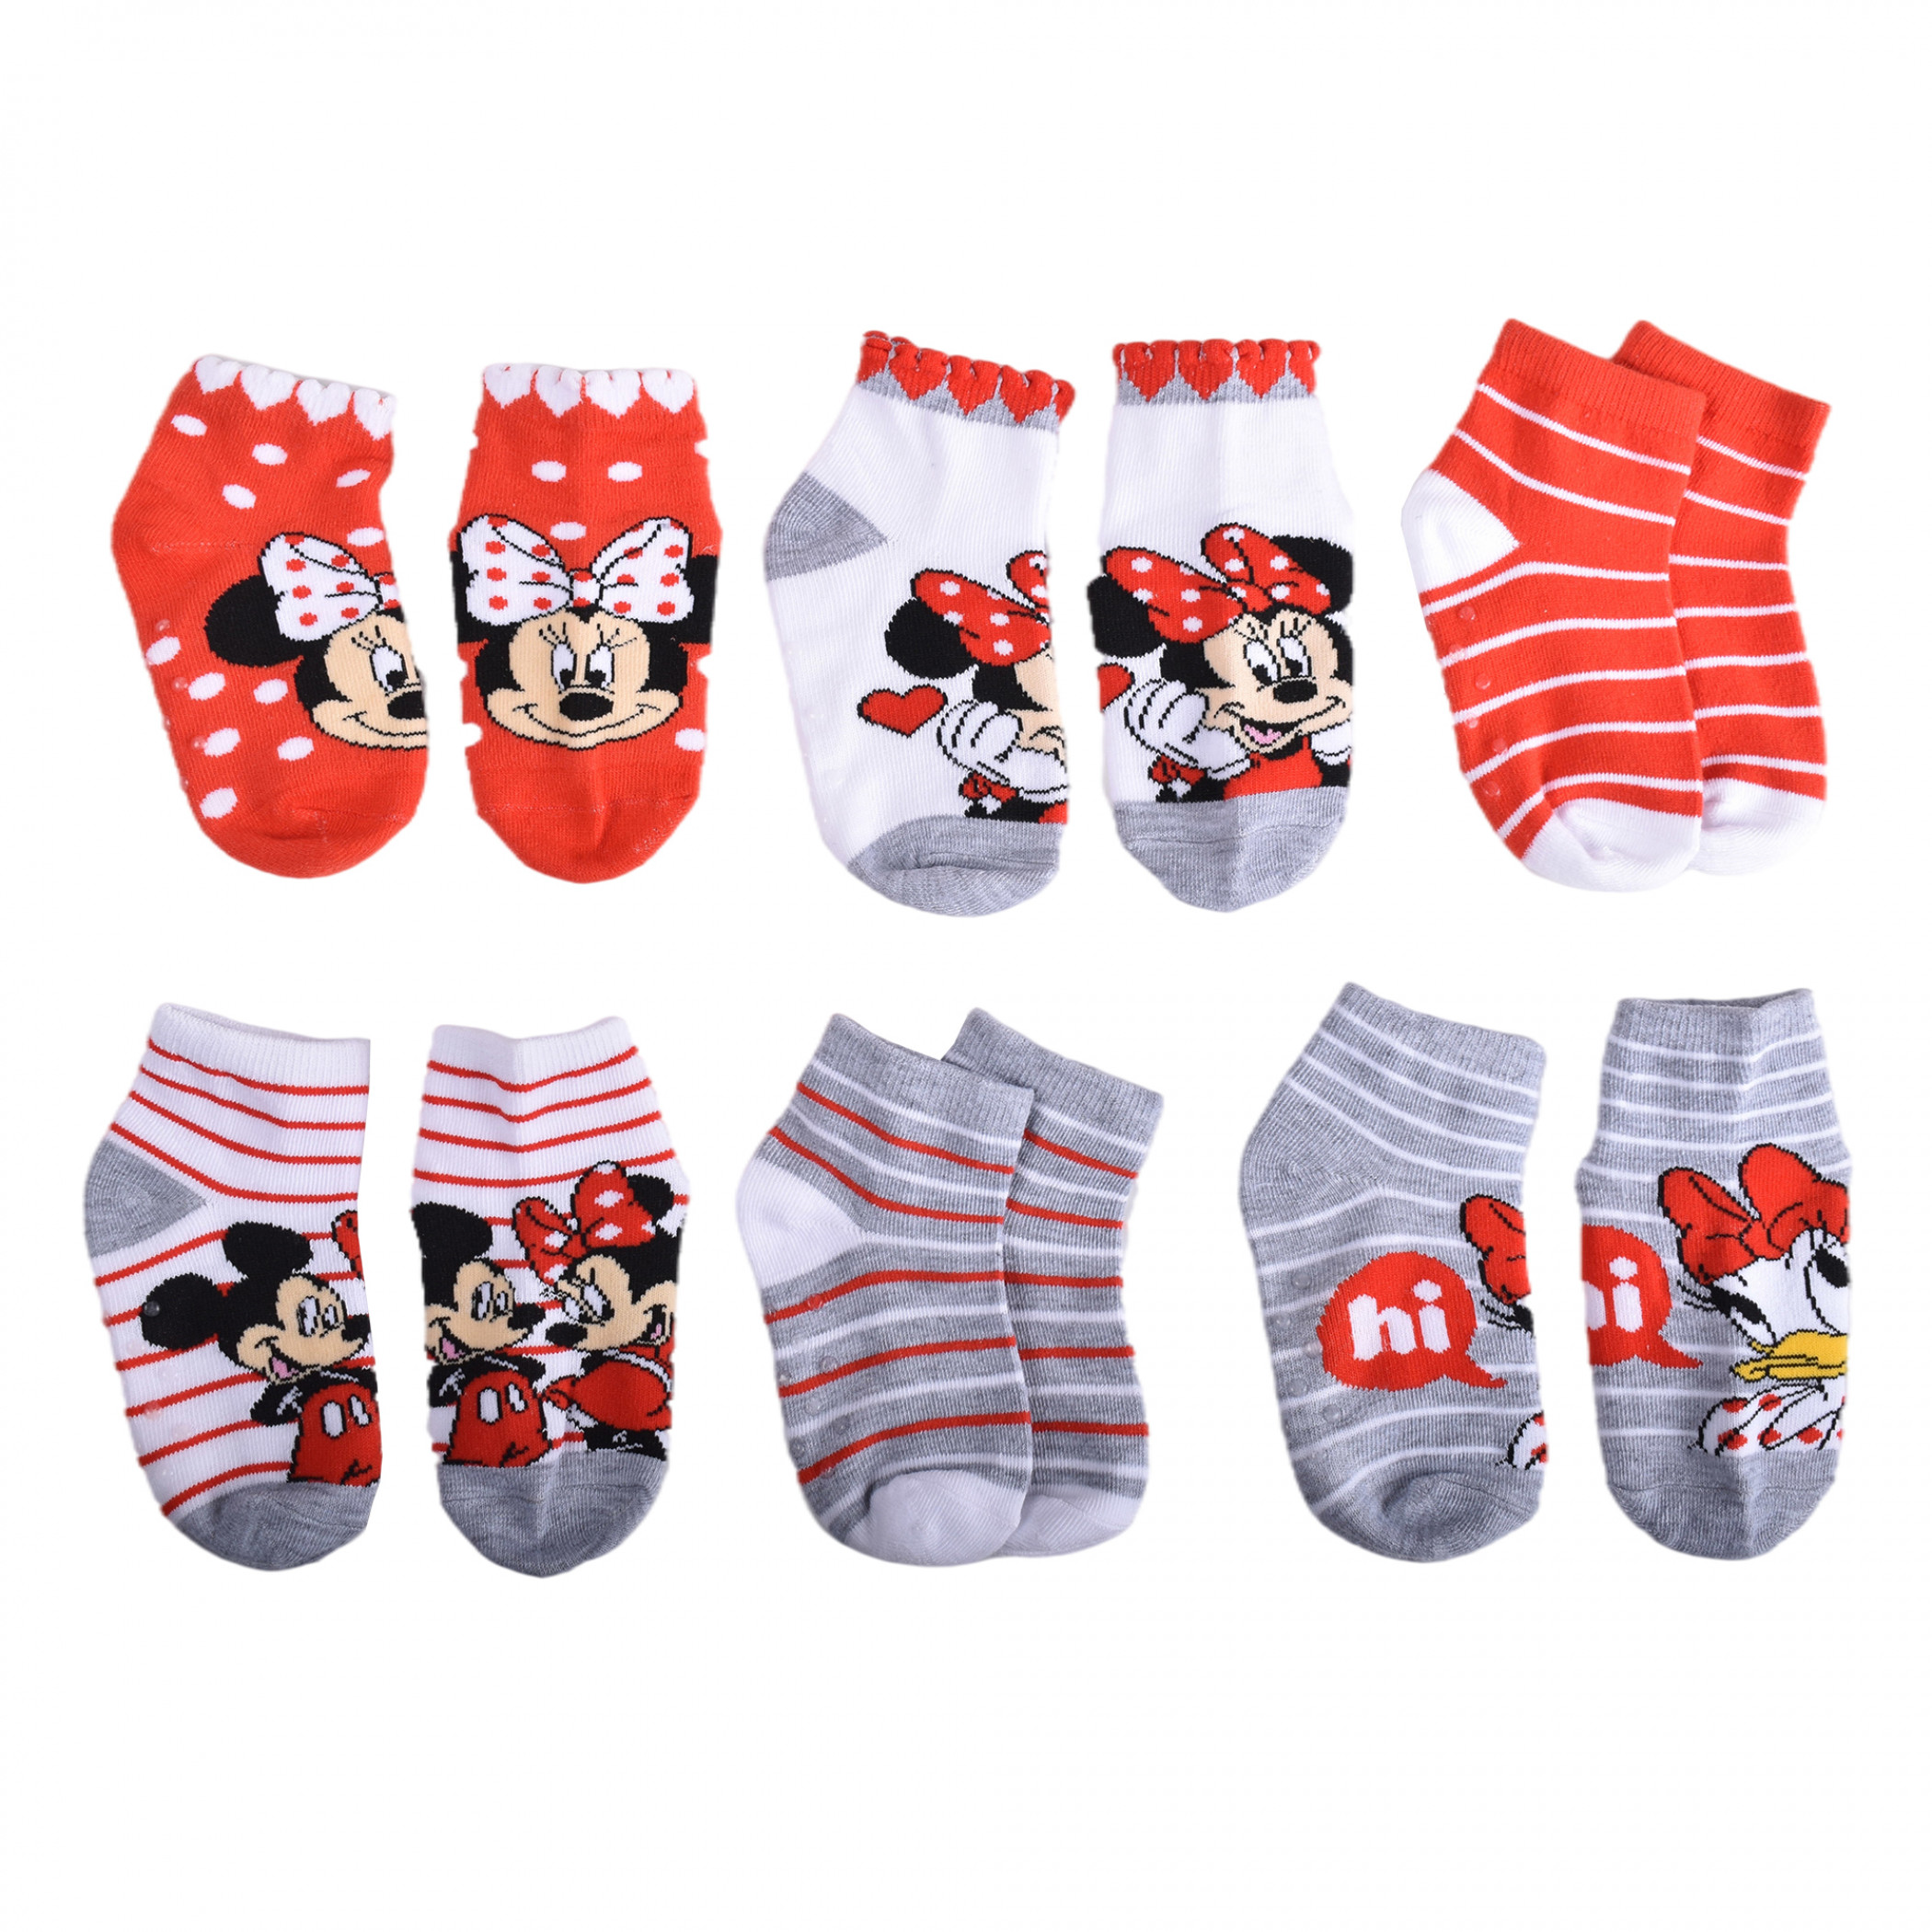 New DISNEY Ladies 5 Pair MICKEY MOUSE PATRIOTIC No Show Socks RED, WHITE,  BLUE